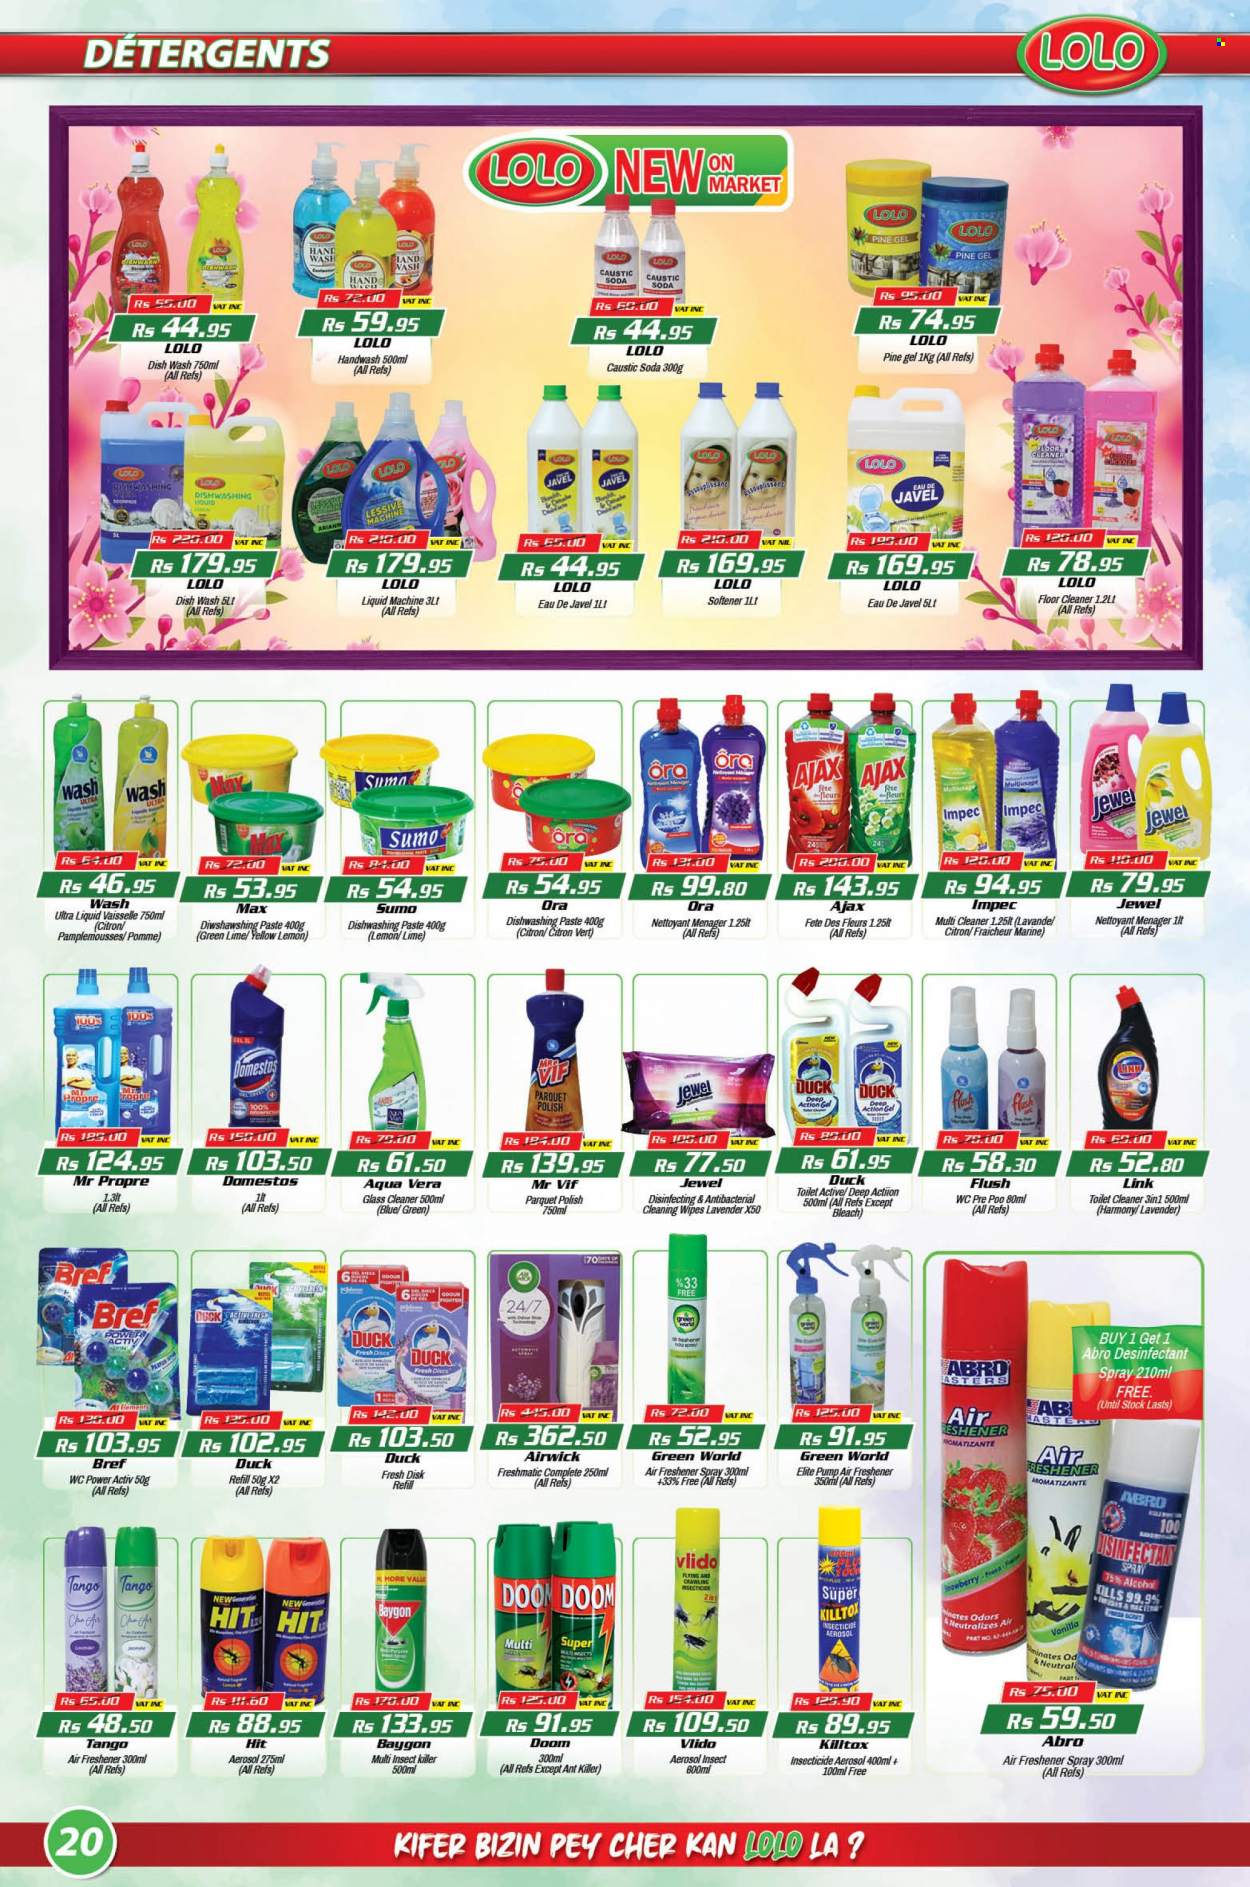 thumbnail - LOLO Hyper Catalogue - 25.11.2022 - 14.12.2022 - Sales products - soda, alcohol, cleansing wipes, wipes, Domestos, cleaner, bleach, floor cleaner, toilet cleaner, Bref Power, glass cleaner, Ajax, fabric softener, dishwashing liquid, hand wash, insecticide, insect killer, pin, air freshener, Air Wick, freshener spray. Page 20.